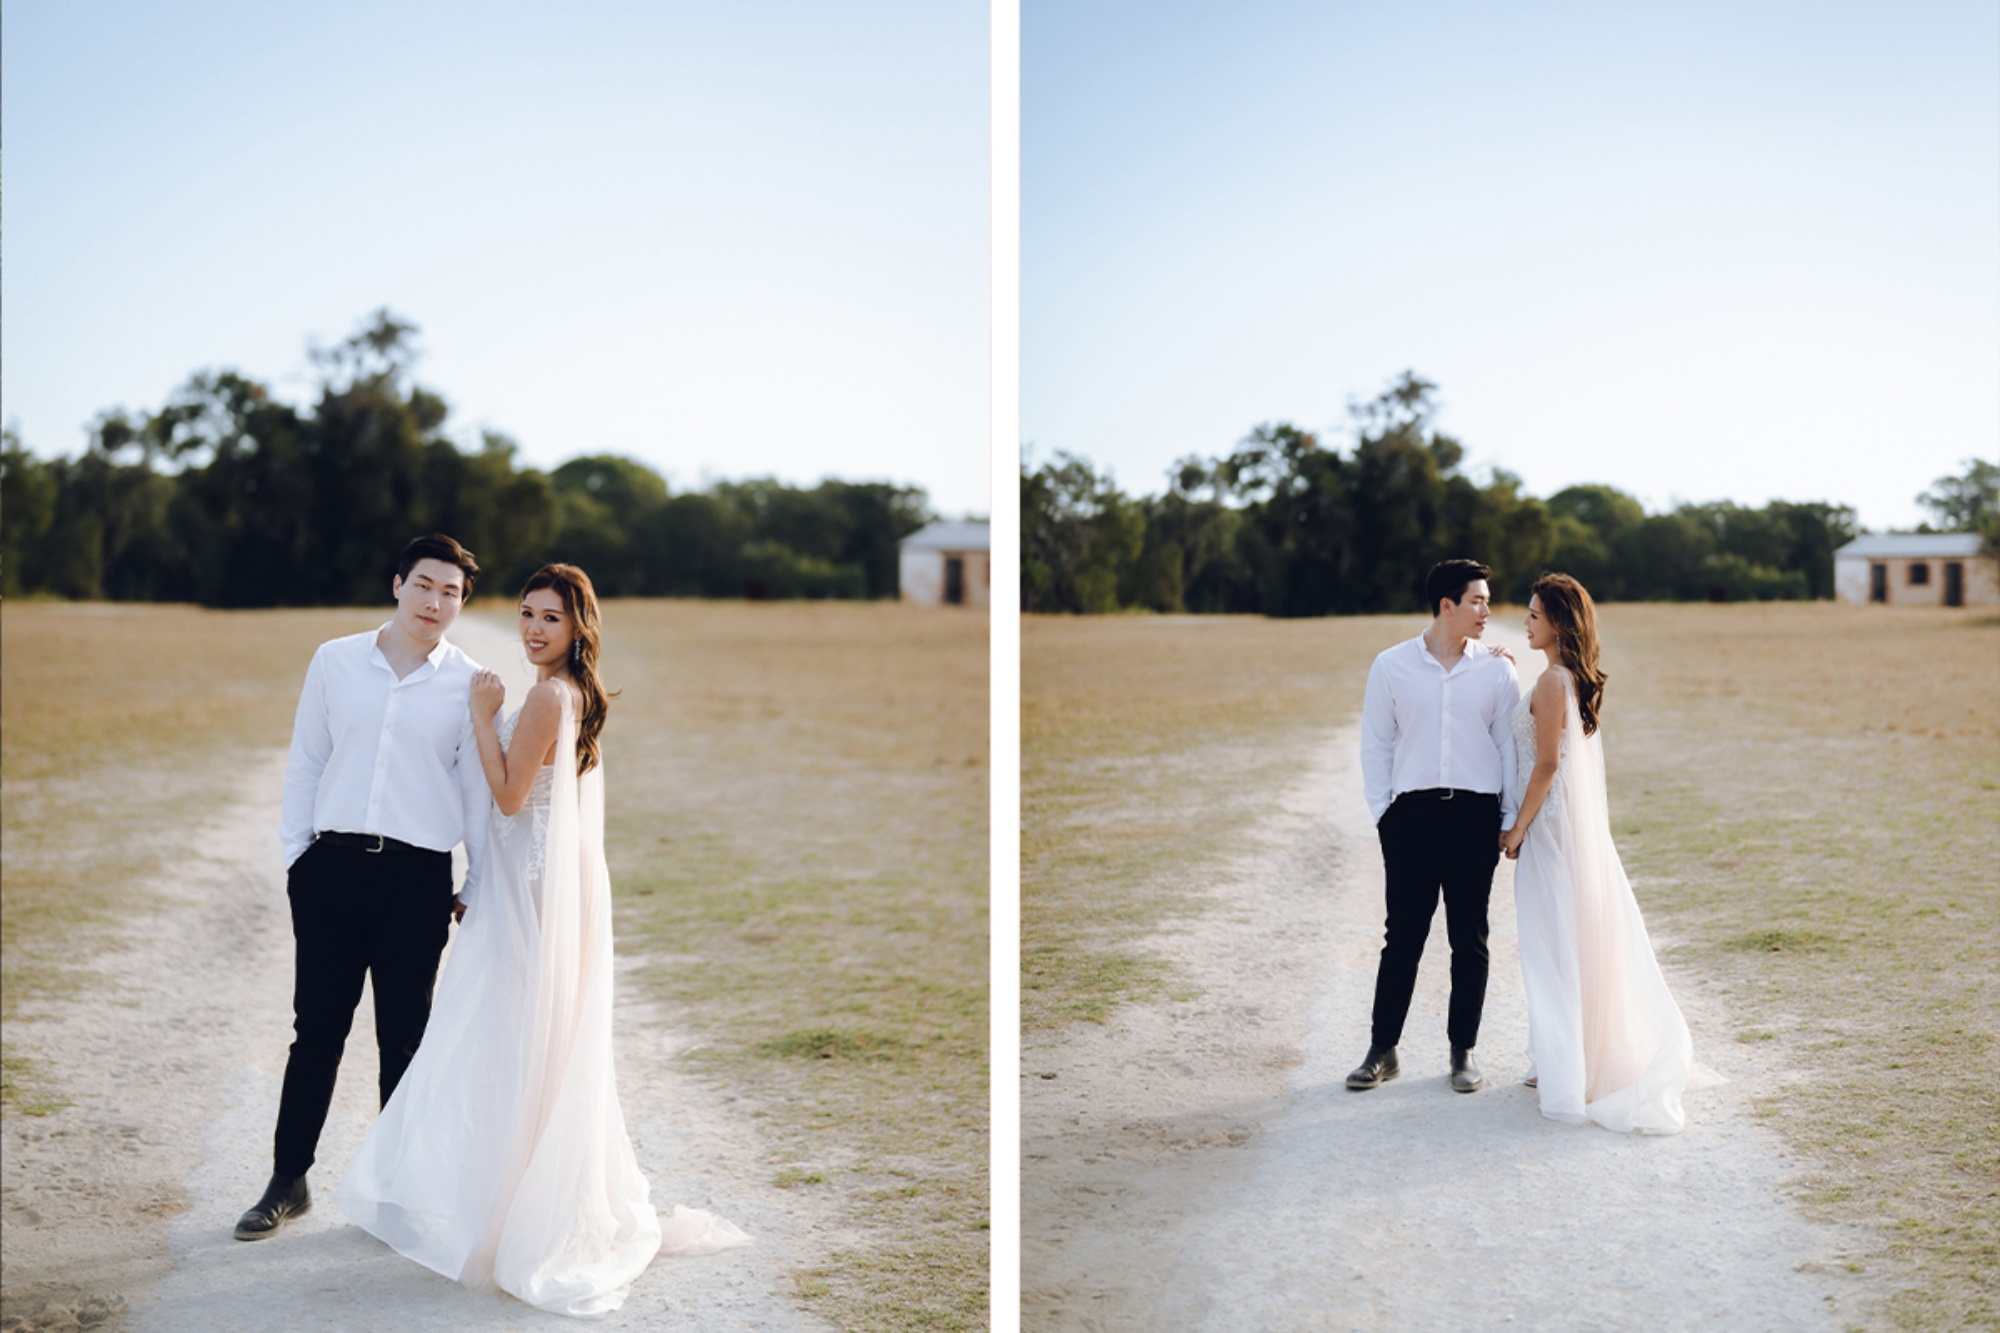 Capturing Forever in Perth: Jasmine & Kamui's Pre-Wedding Story by Jimmy on OneThreeOneFour 13